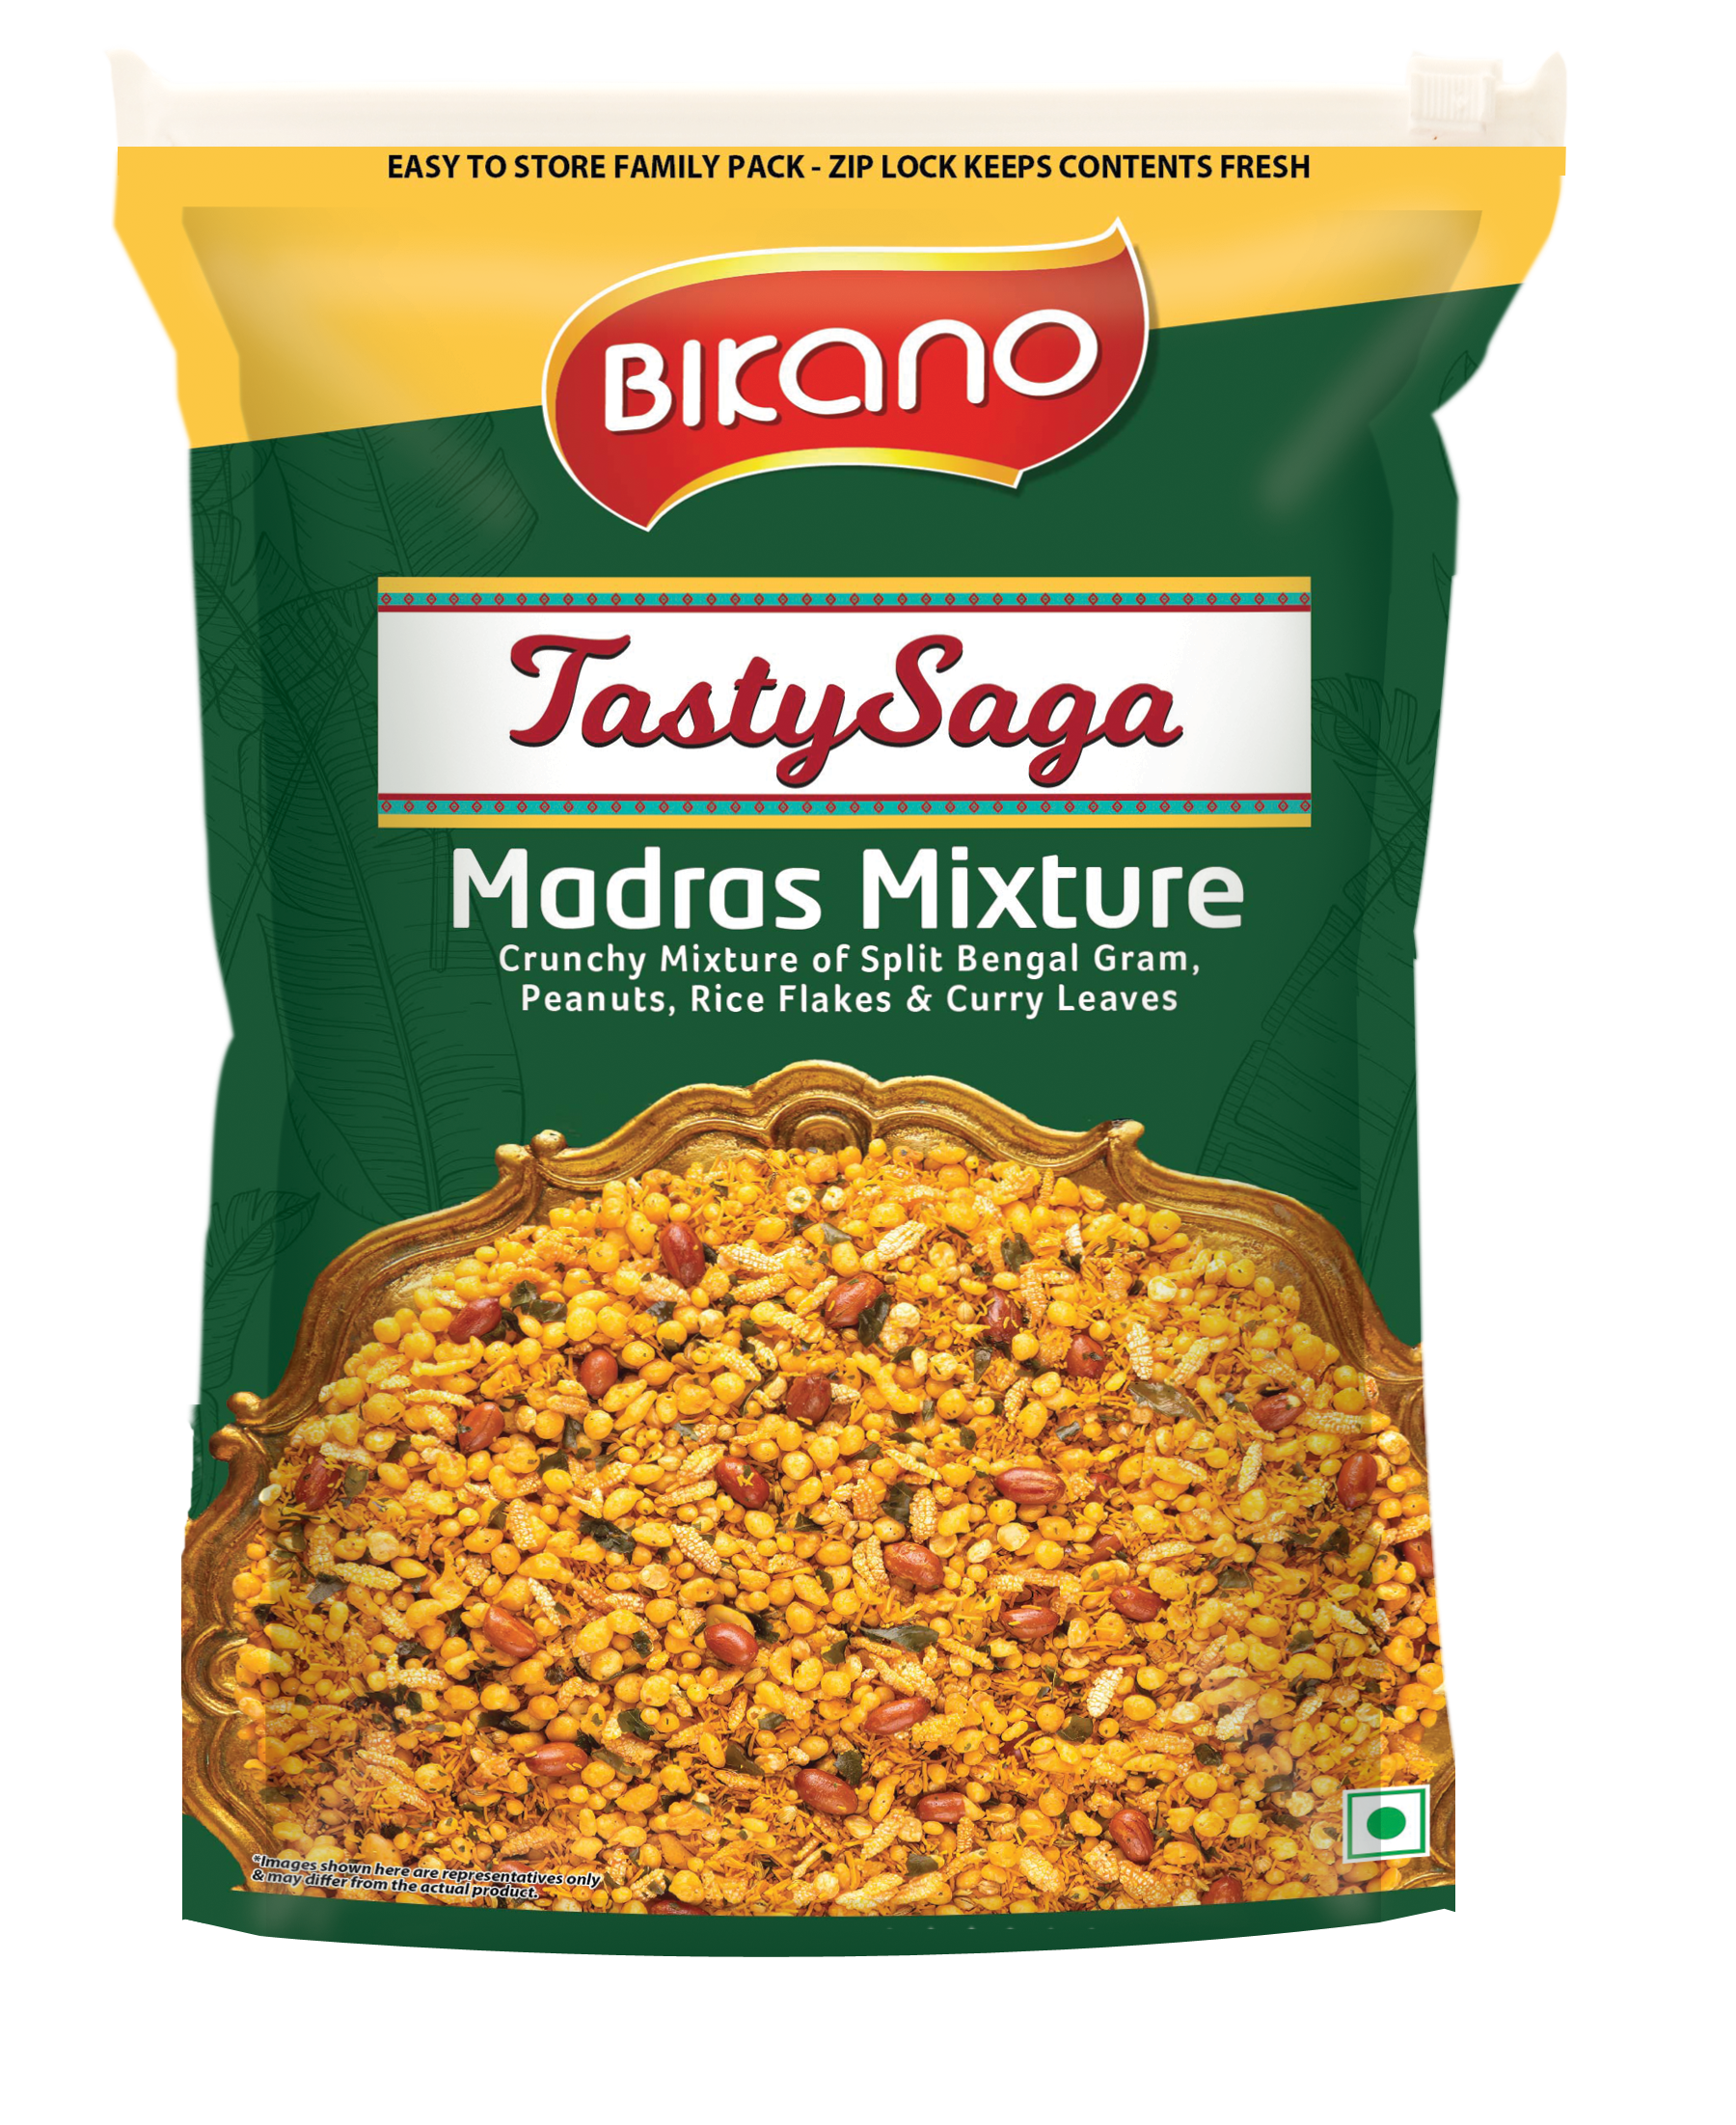 Bikano eyes the south market, launches the "Madras" and "Tasty Saga" Flavor Mixtures